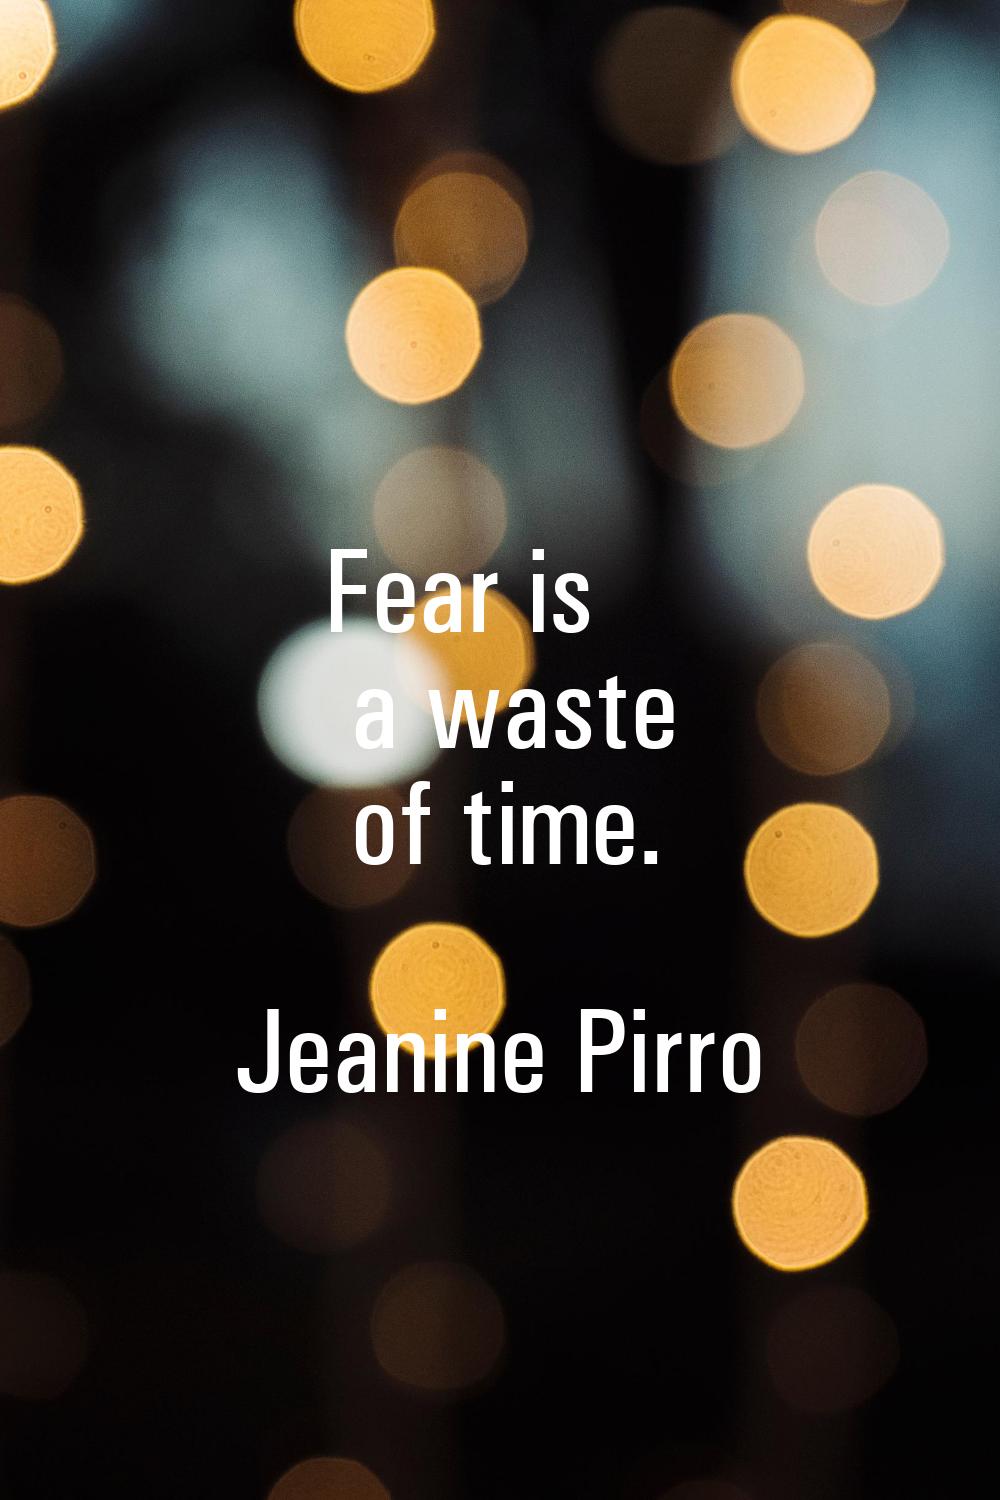 Fear is a waste of time.